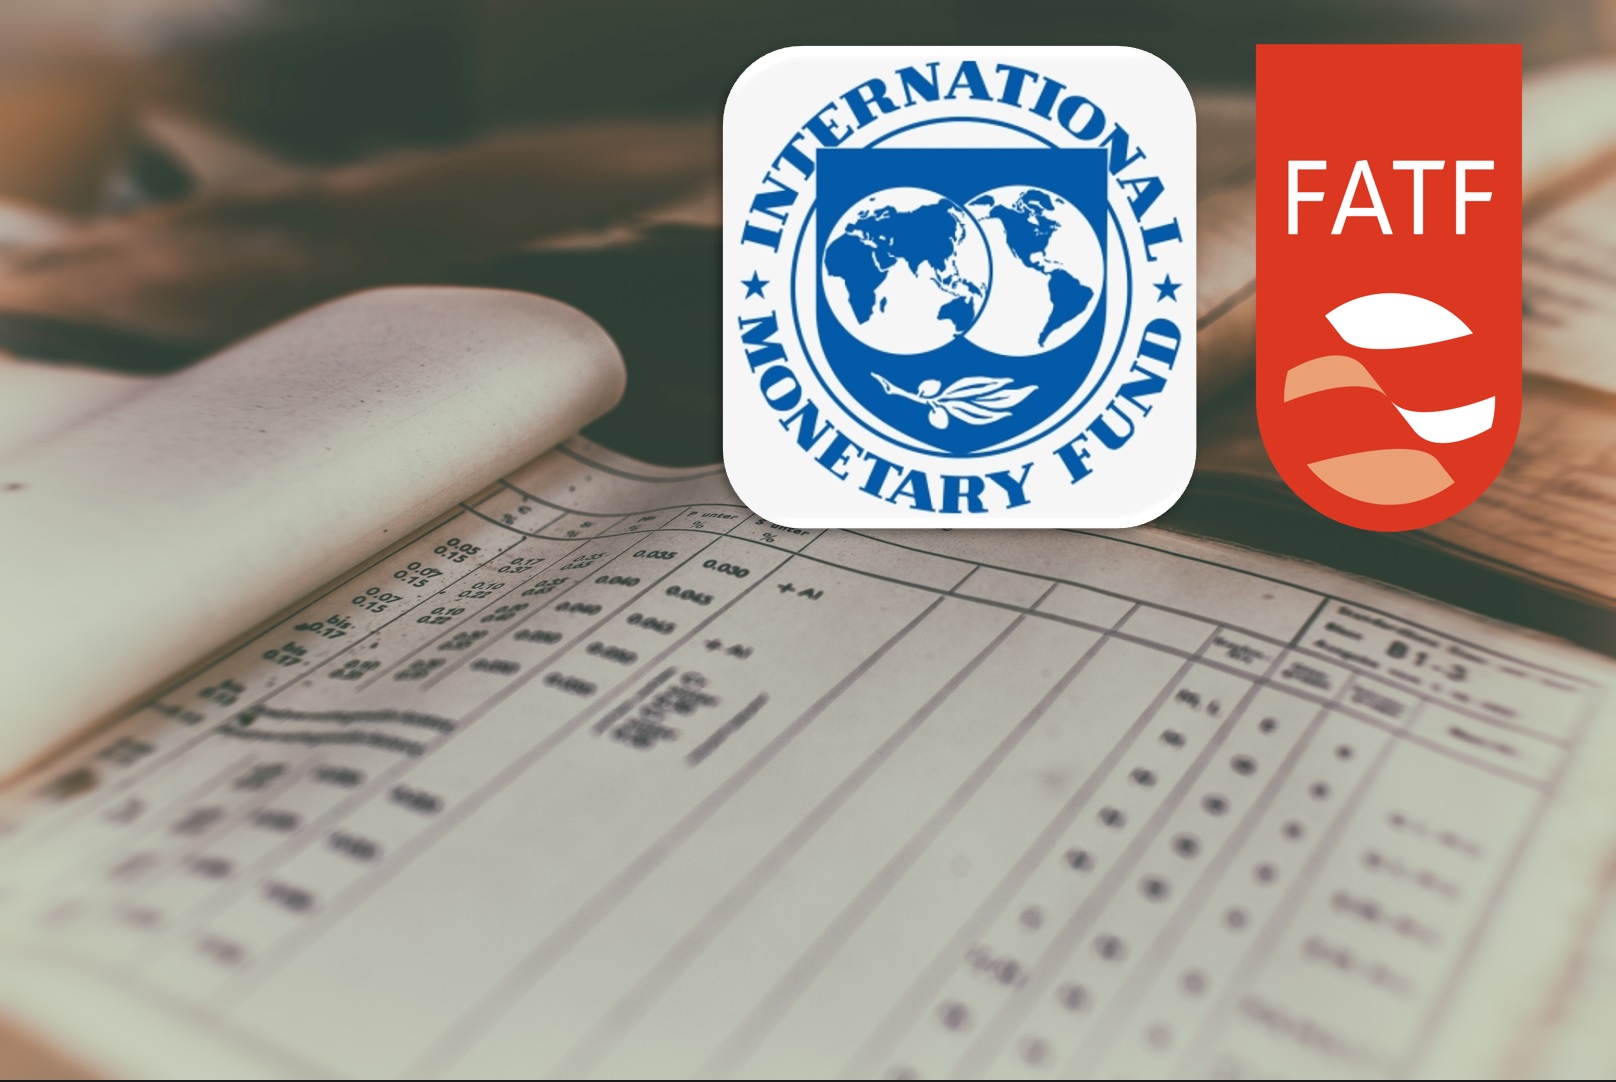 FATF and IMF in the fight against financial crime